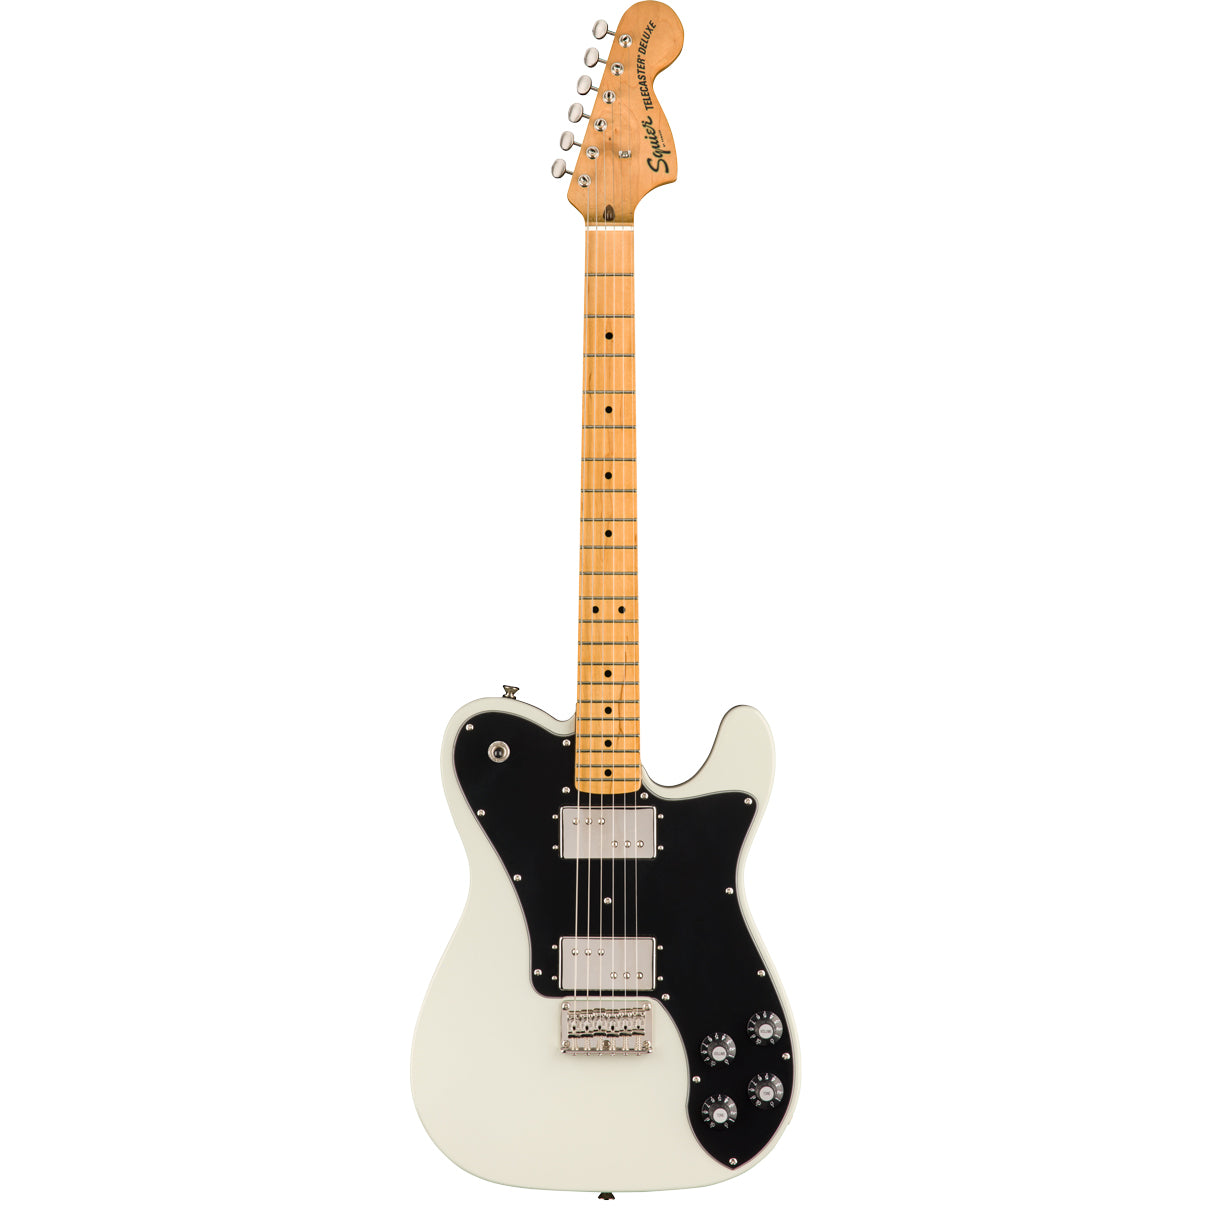 Squier Classic Vibe '70s Telecaster Deluxe Olympic White